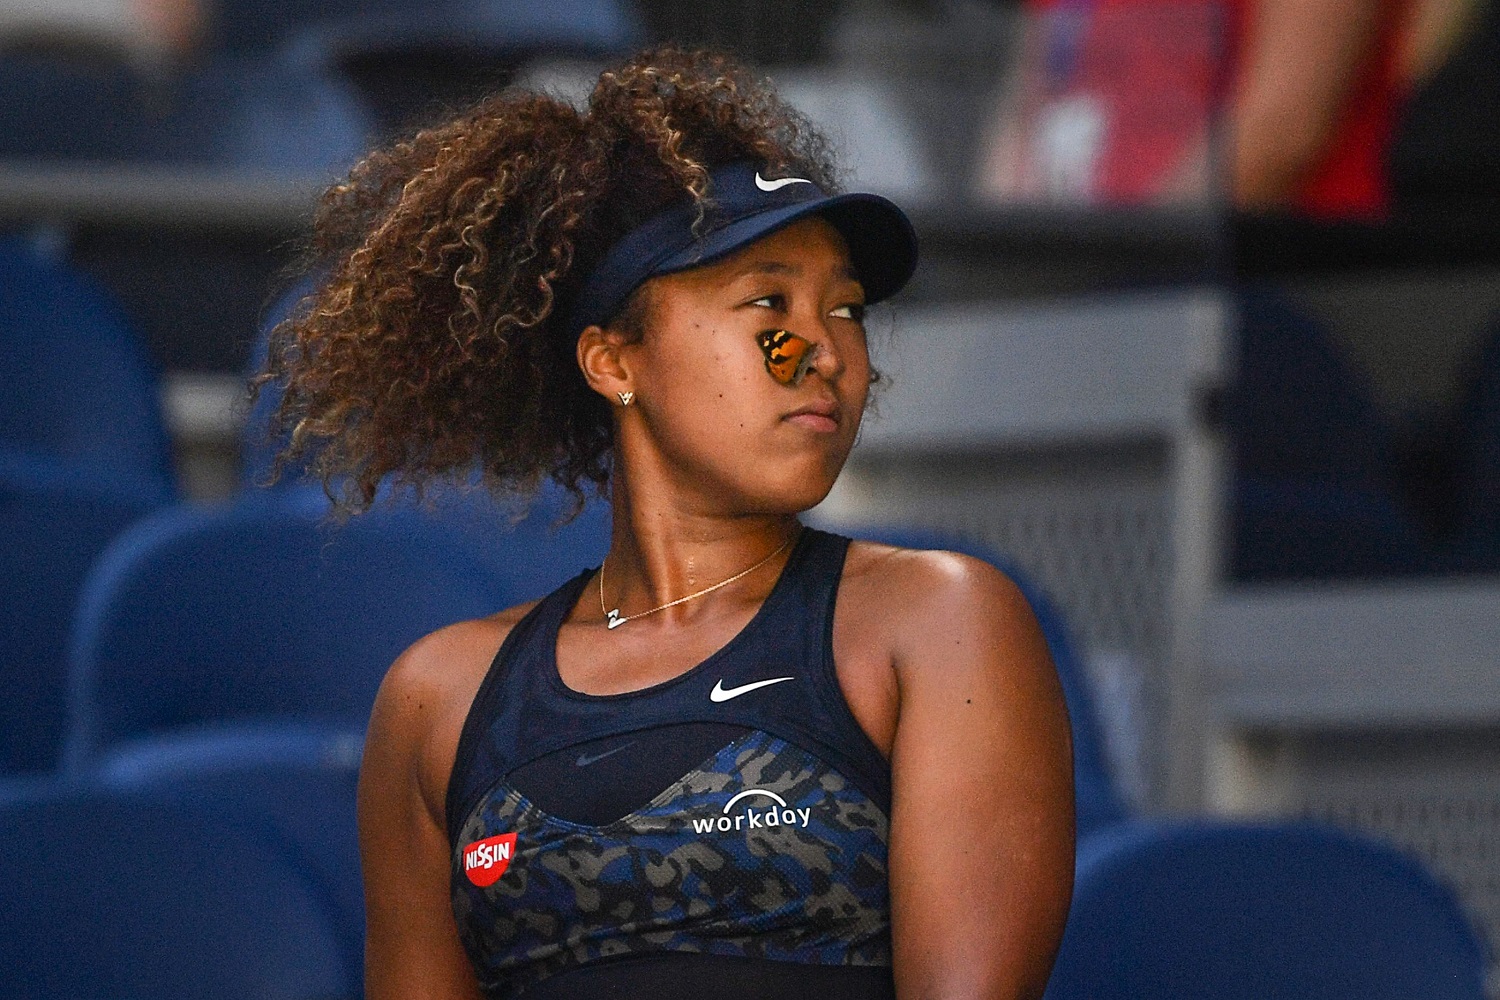 A butterfly lands on Japan's Naomi Osaka as she plays against Tunisia's Ons Jabeur during their women's singles match at the Australian Open tennis tournament in Melbourne. | Paul Crock/AFP via Getty Images